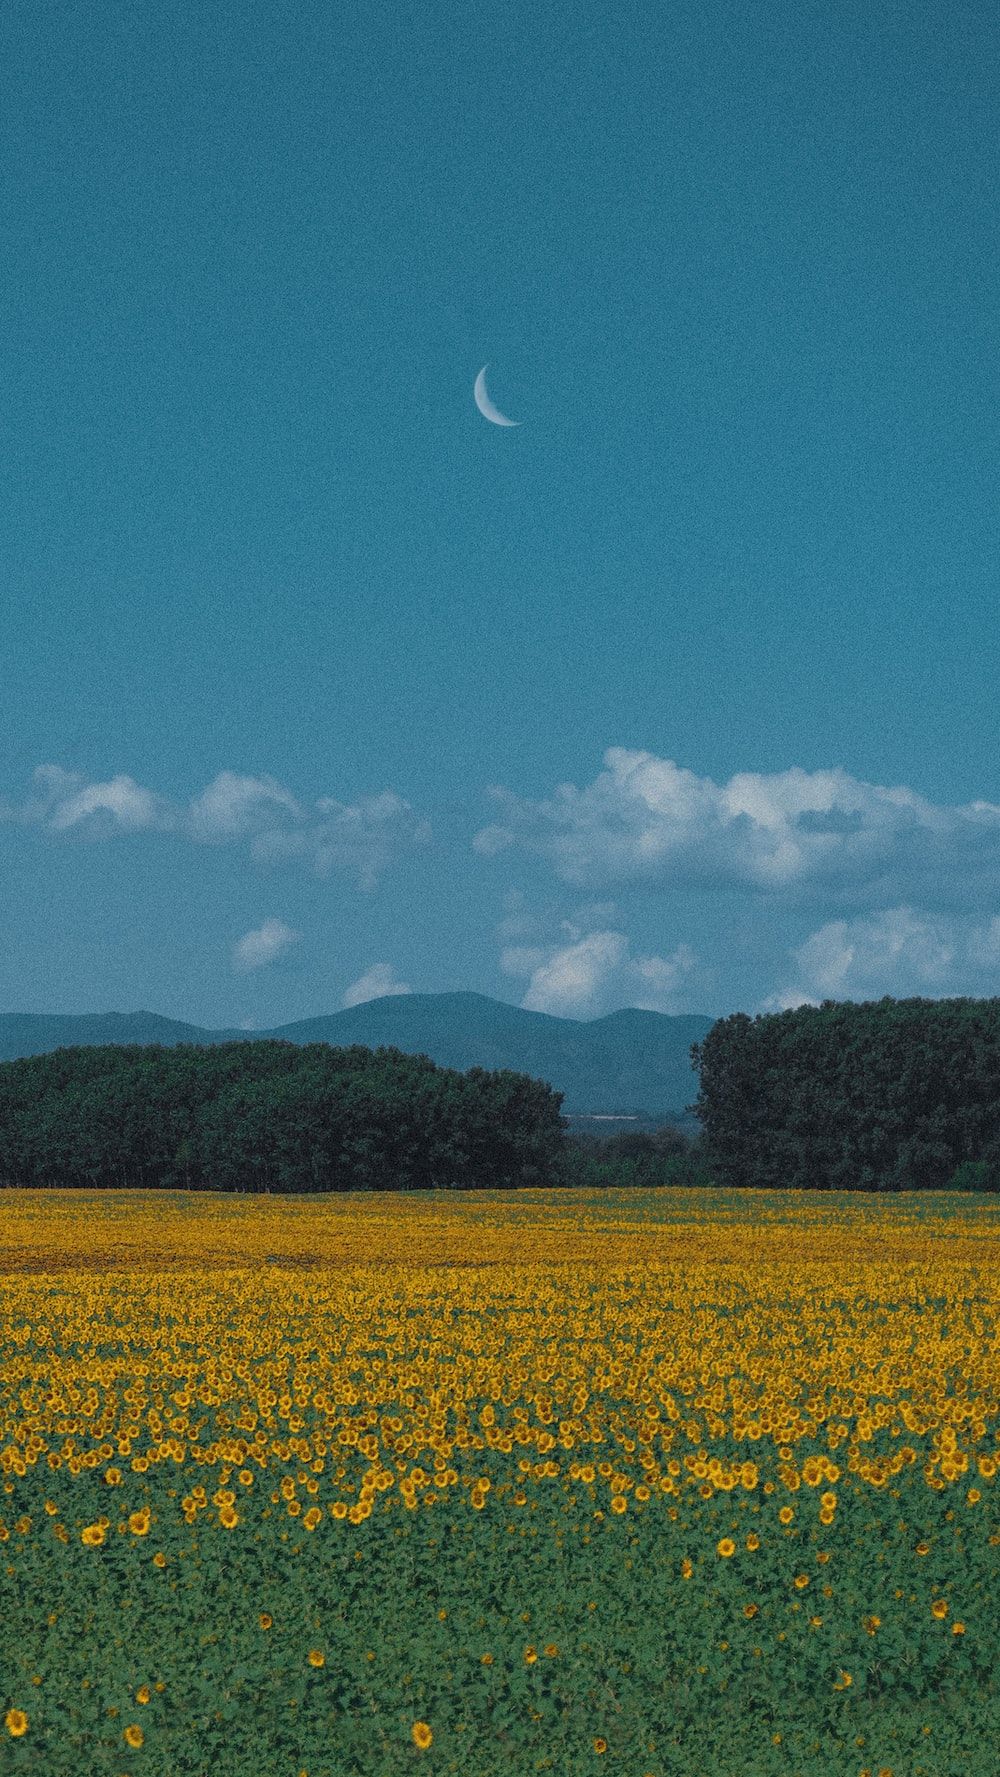 A field of sunflowers with a blue sky and a crescent moon. - Dark green, green, teal, farm